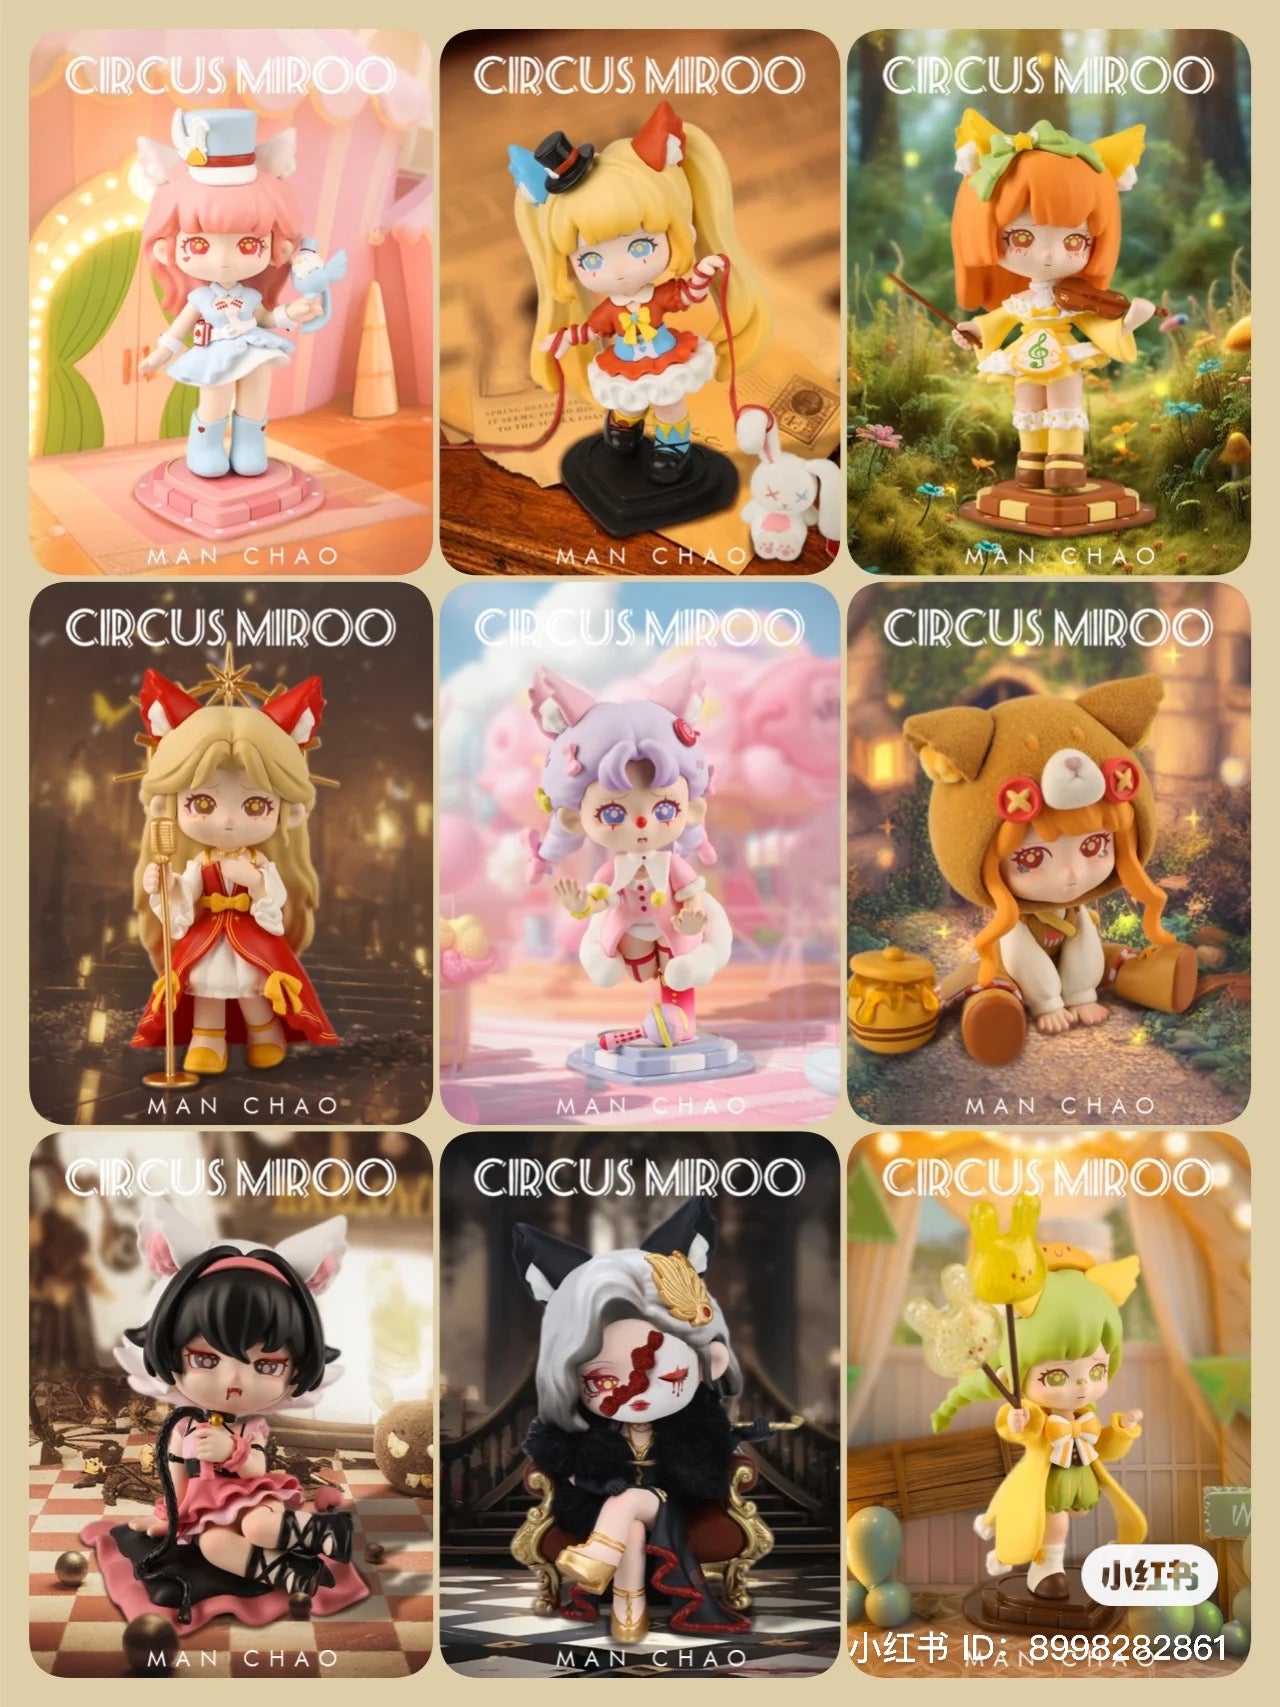 A blind box series featuring MIROO Circus Carnival characters: cartoon dolls, toy animals, and more. Preorder now for May 2024.